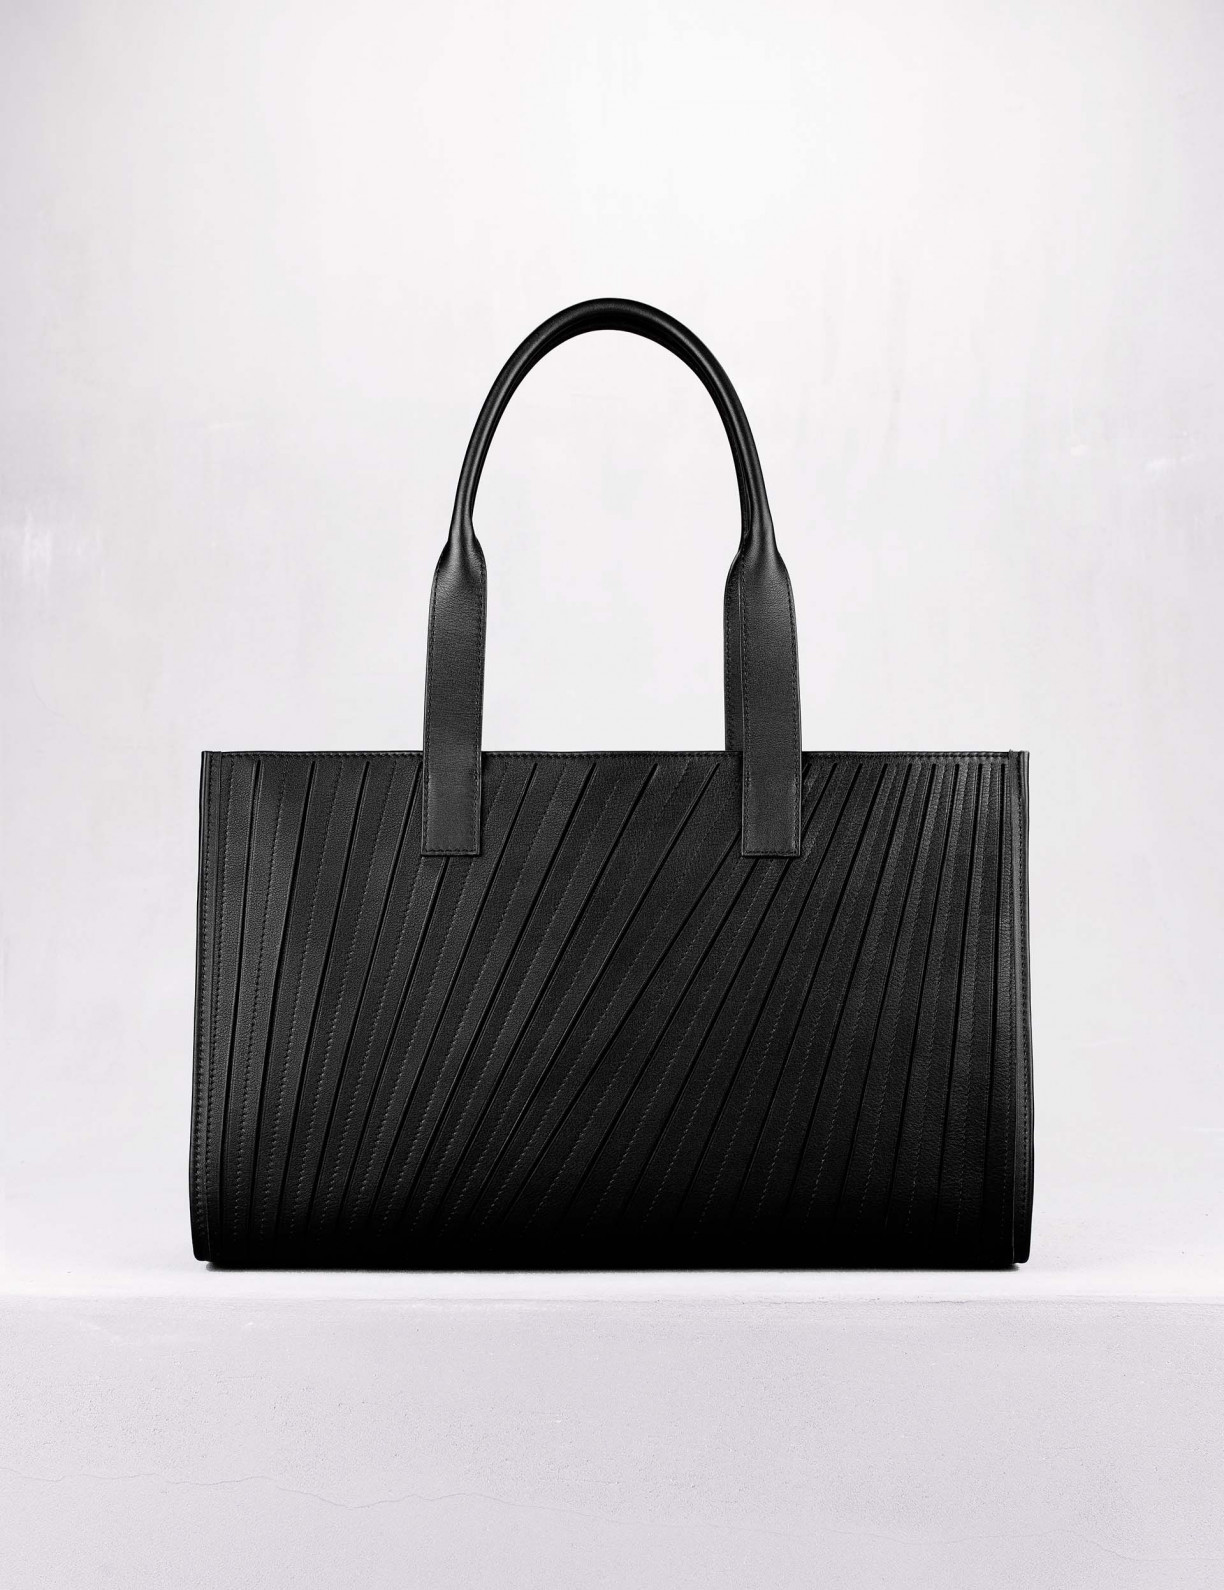 Shopping bag in black pleated|Camille Fournet